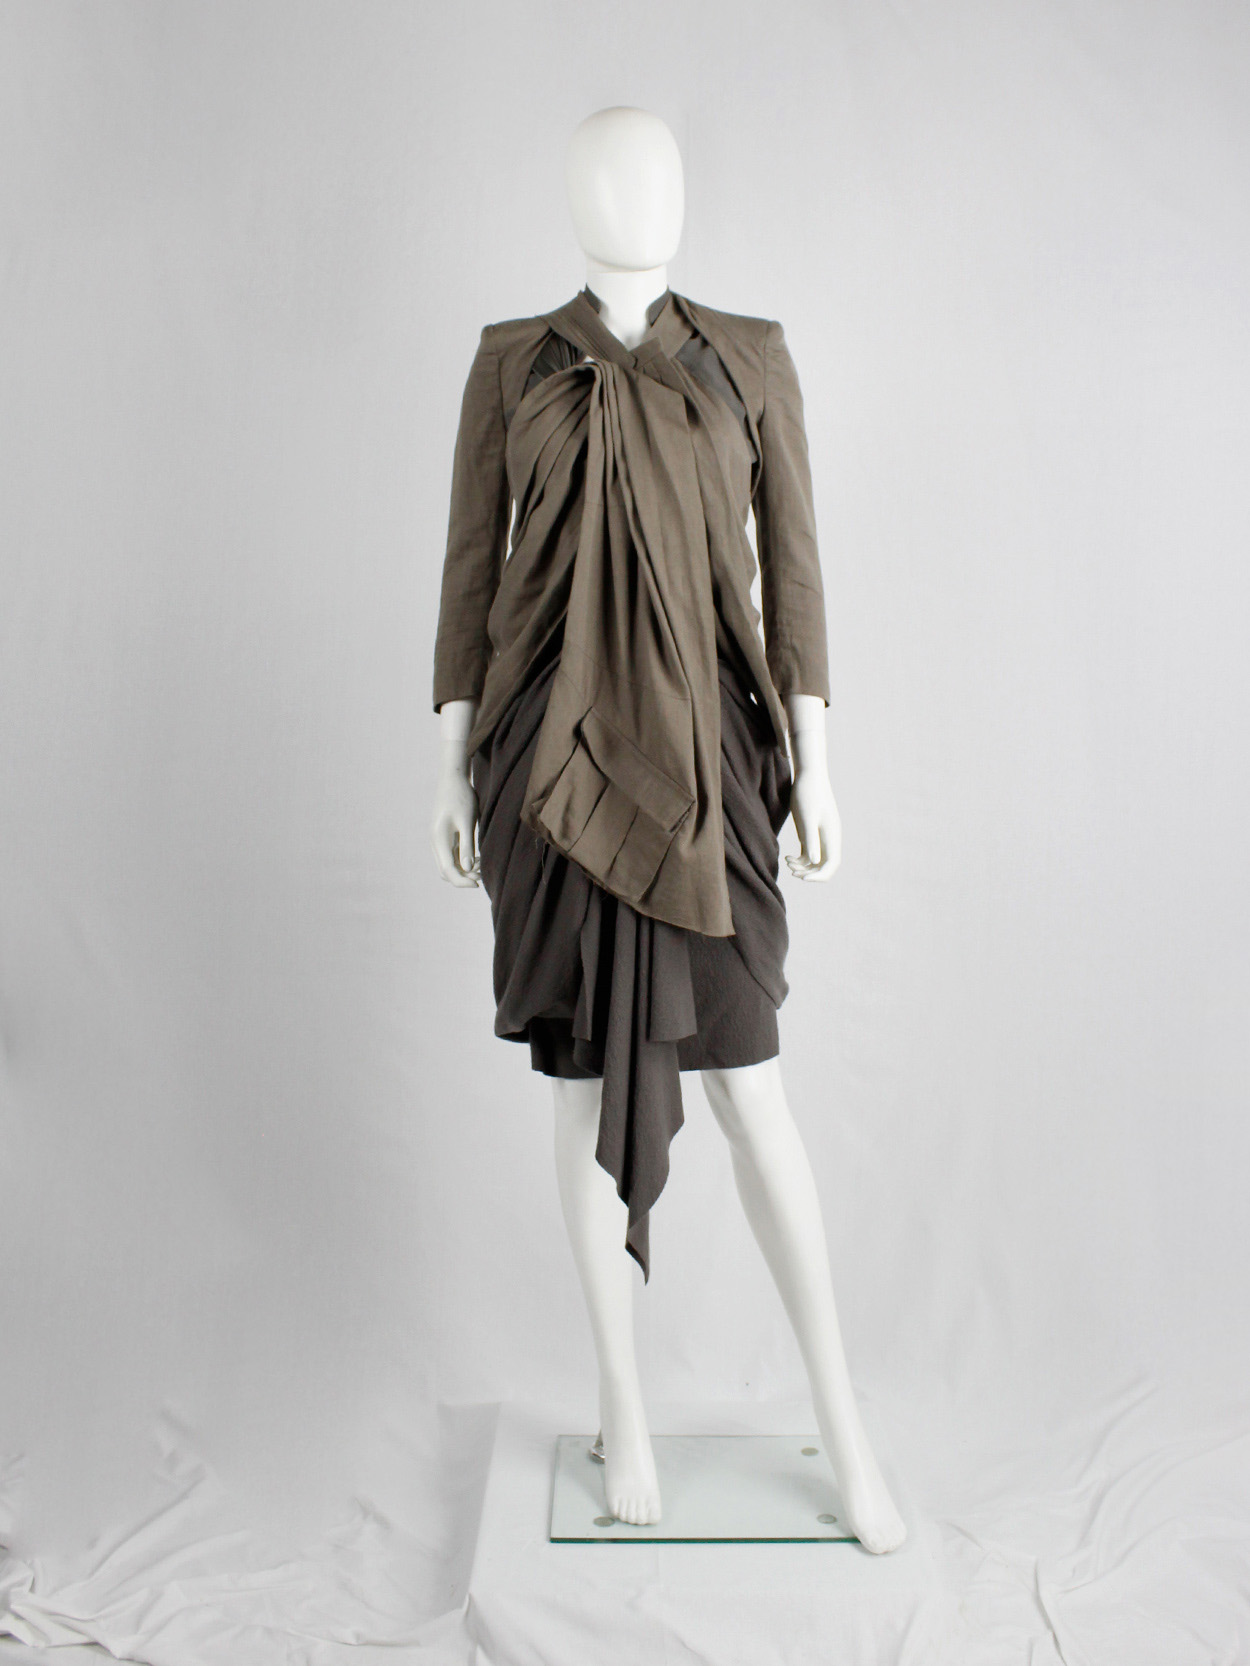 Haider Ackermann beige jacket with draping cut outs and cargo pocket spring 2010 (12)